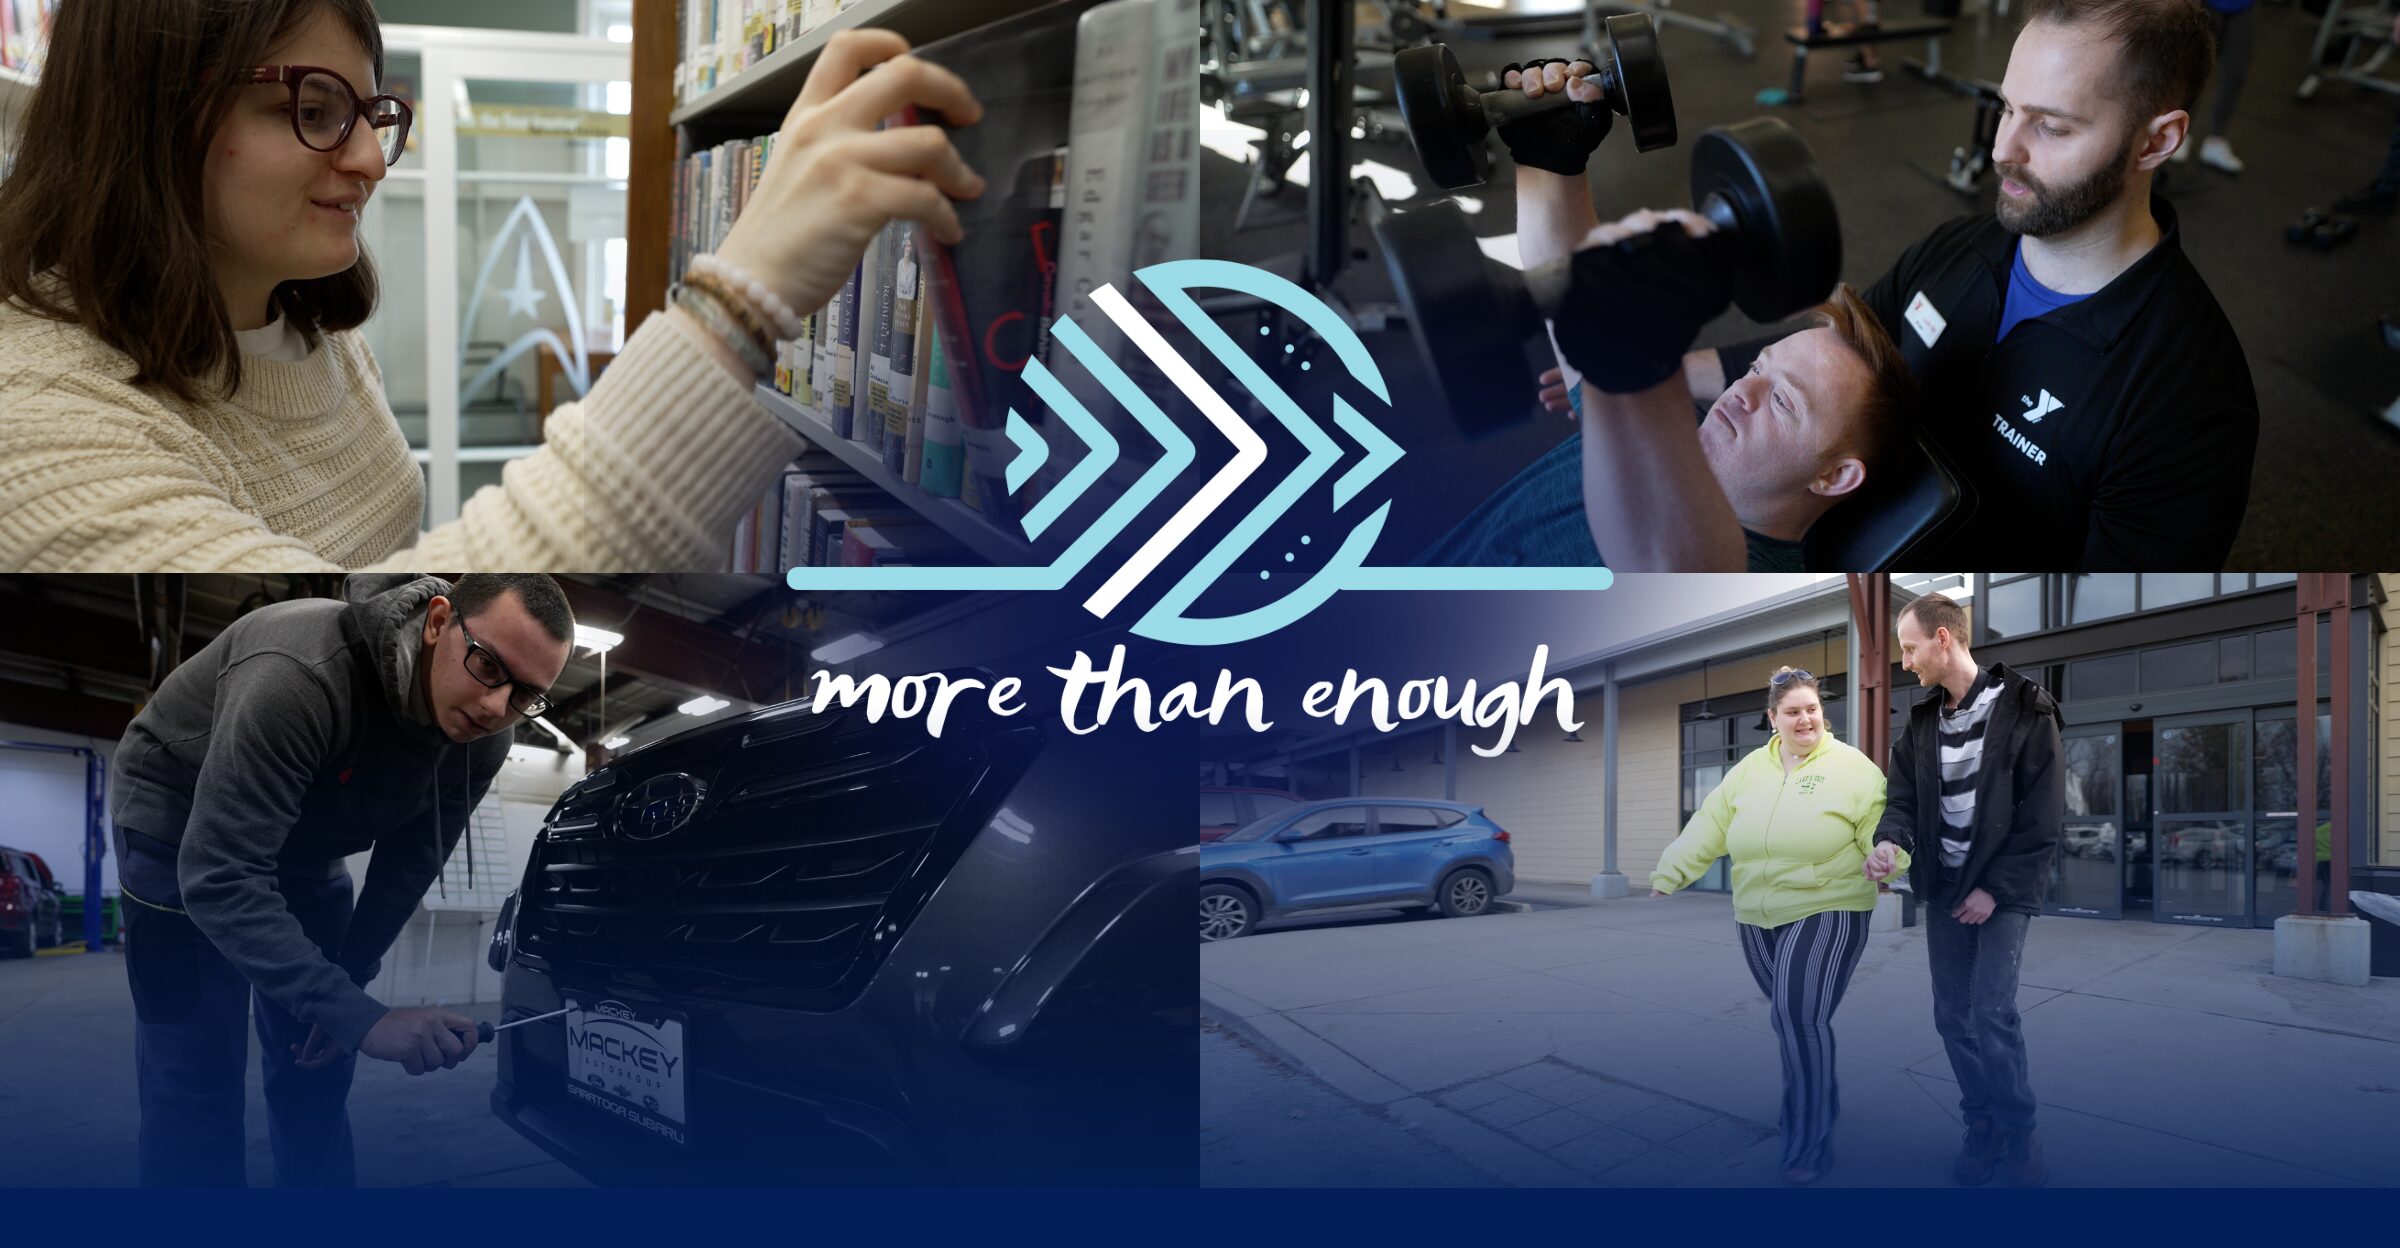 collage of four images: one women pulling a book from a bookcase, one person lifting weights, one person putting license plate cover on a car, and two people walking and holding hands. More than Enough AIM logo over top.